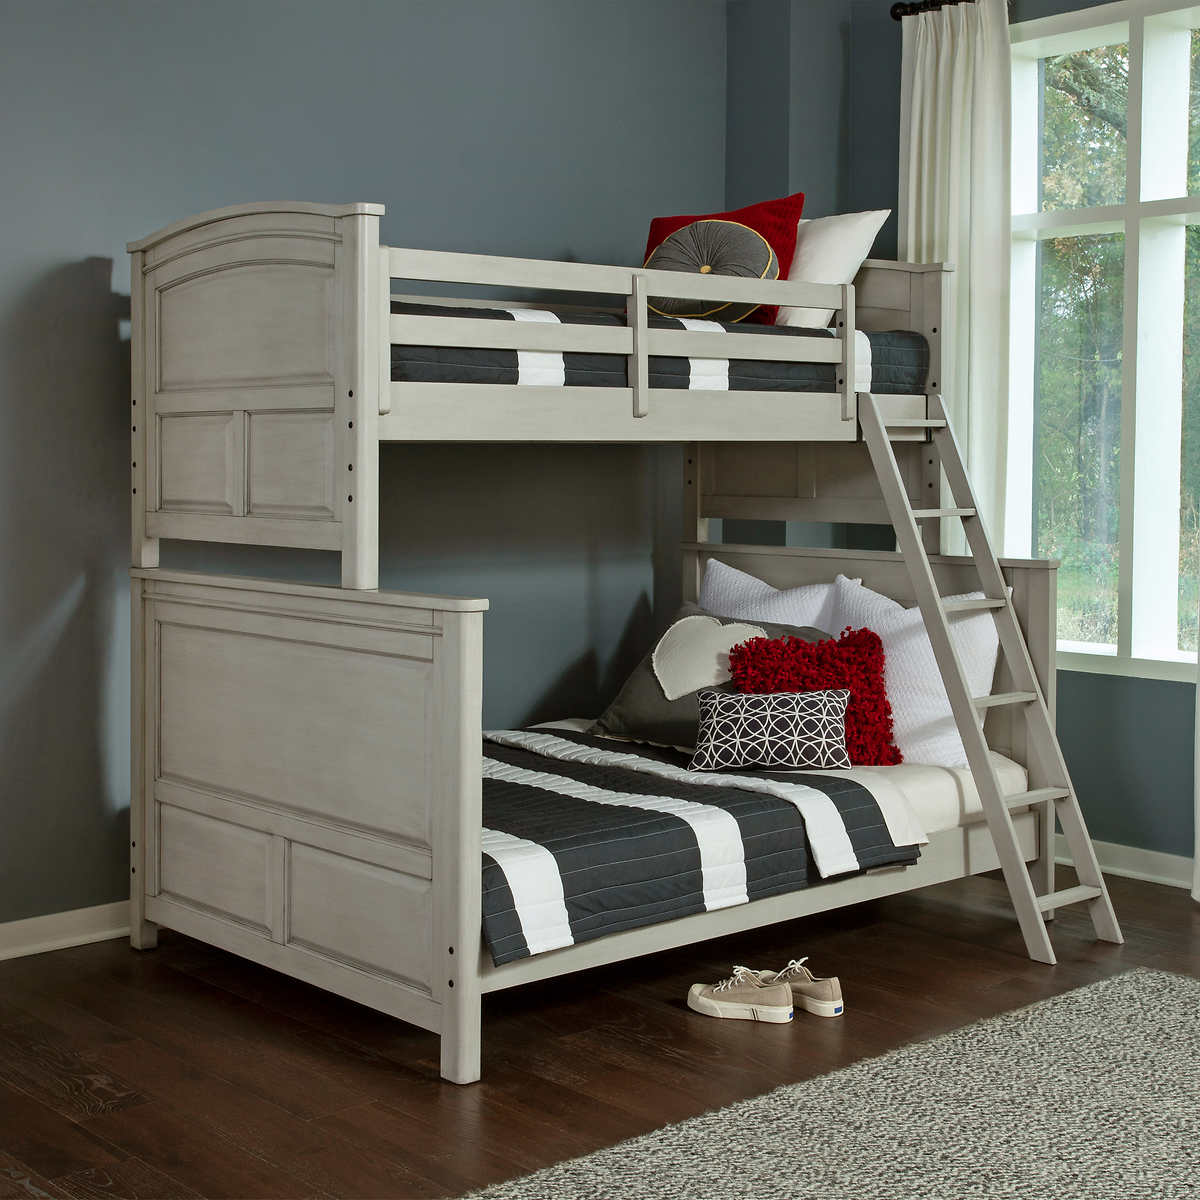 Wingate Twin Over Full Bunk Bed Costco, How To Attach Bunk Beds Together